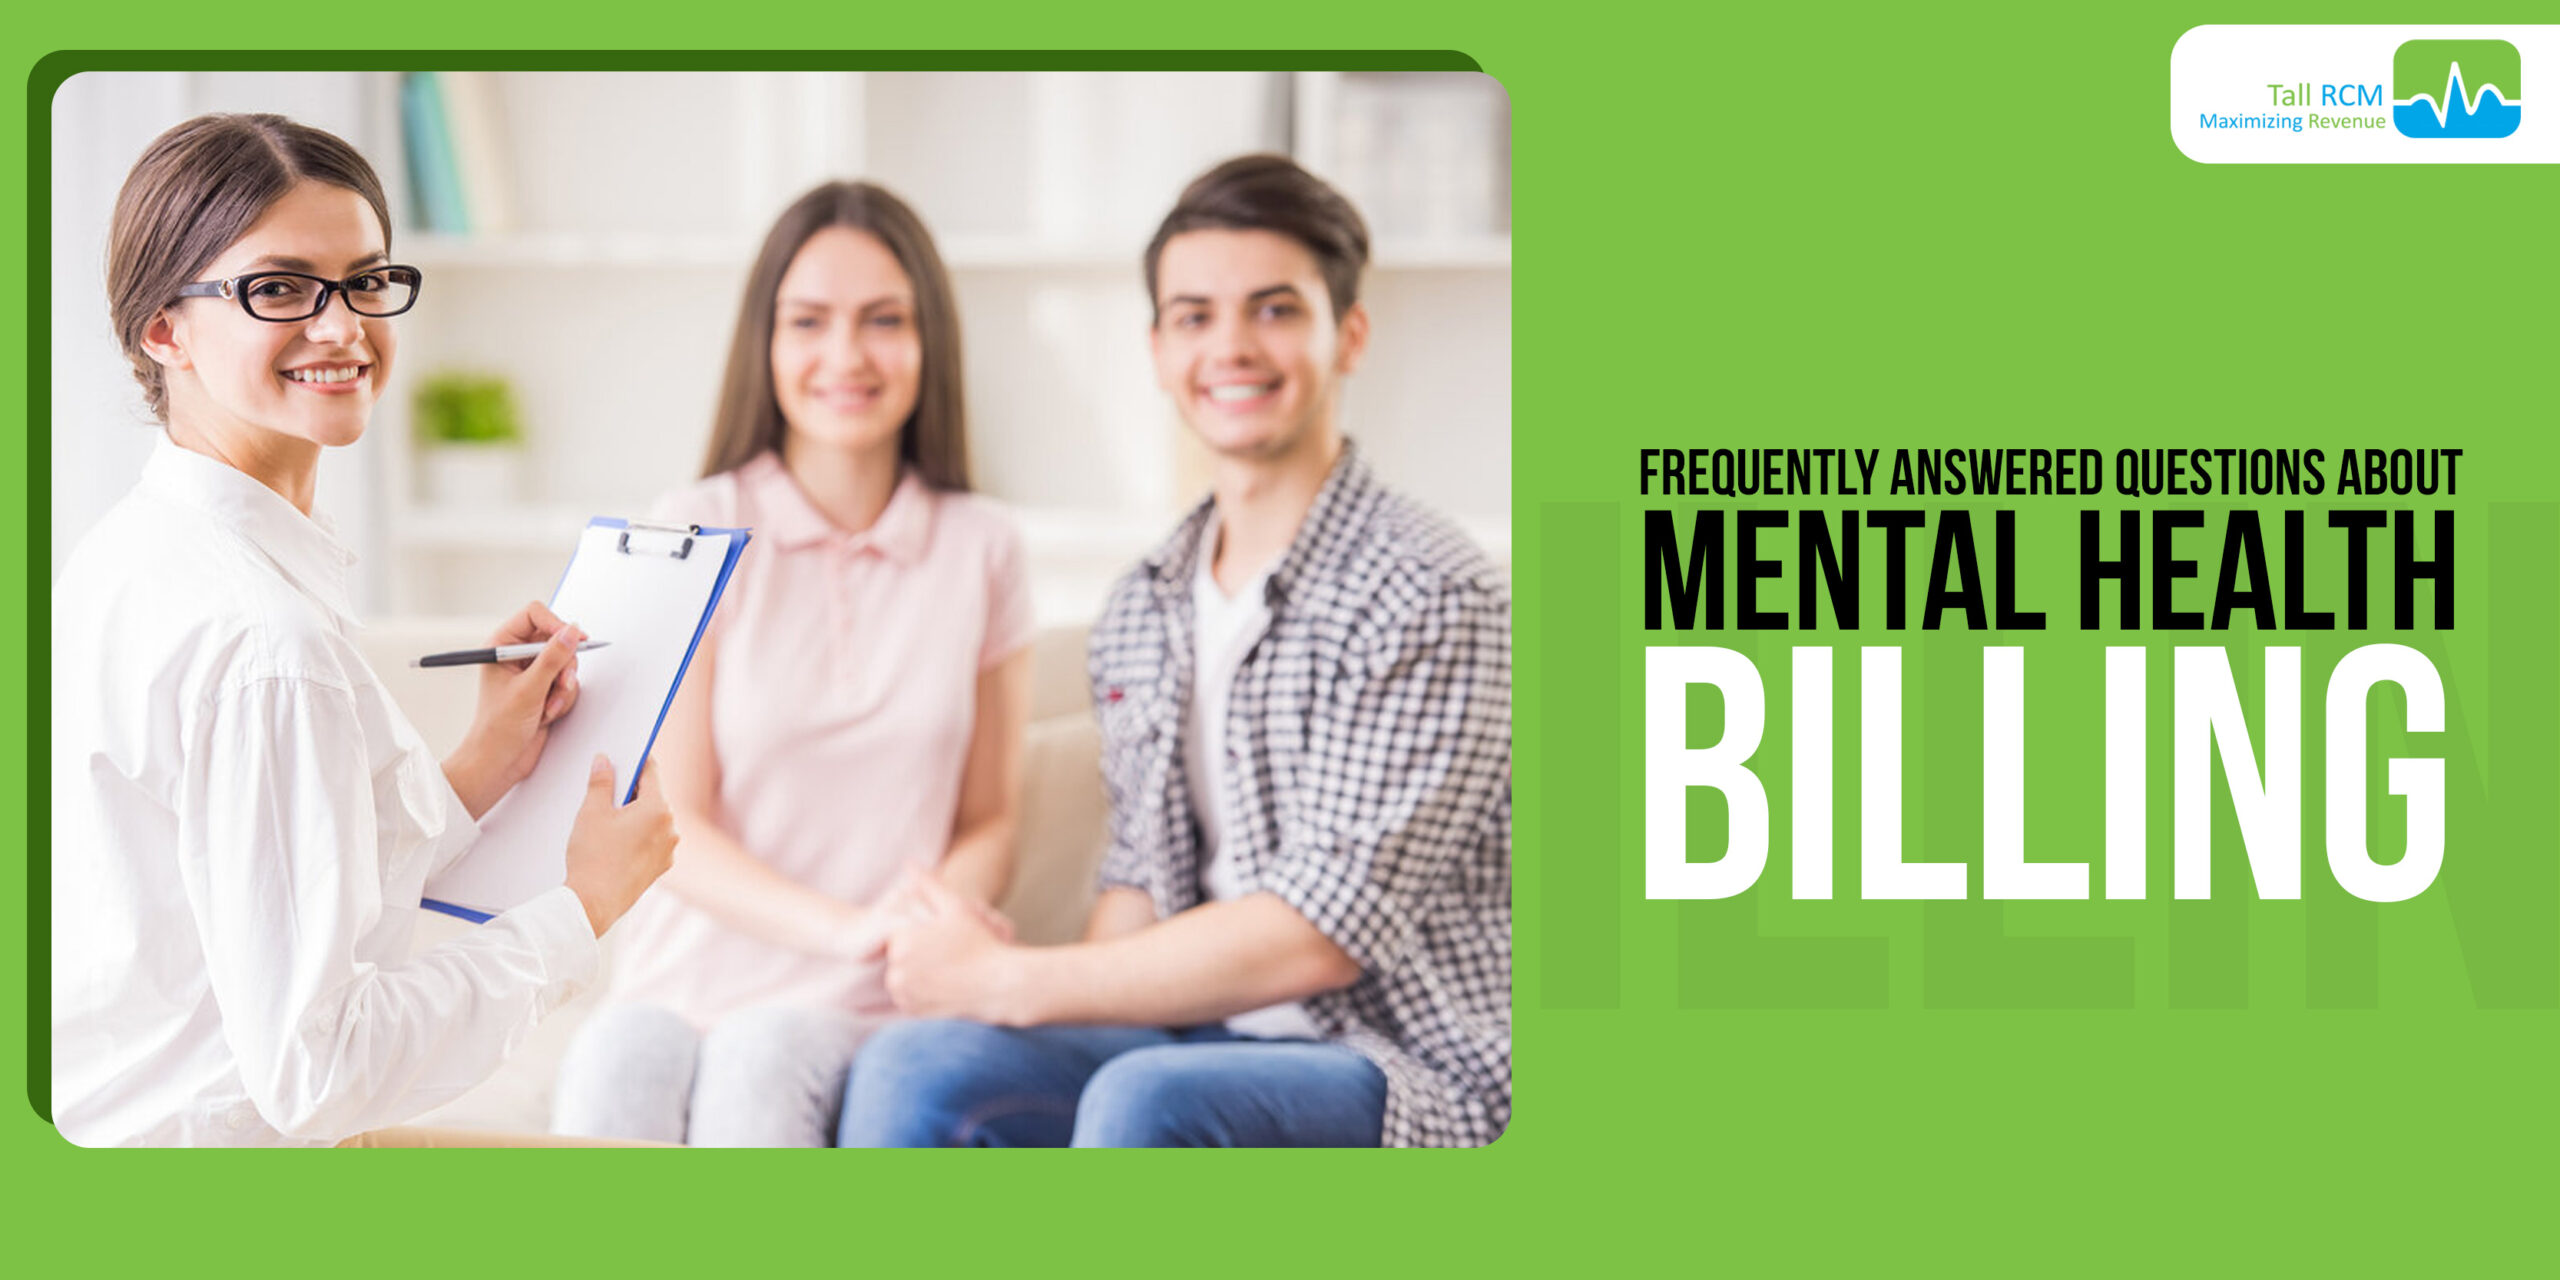 Frequently Answered Questions About Mental Health Billing